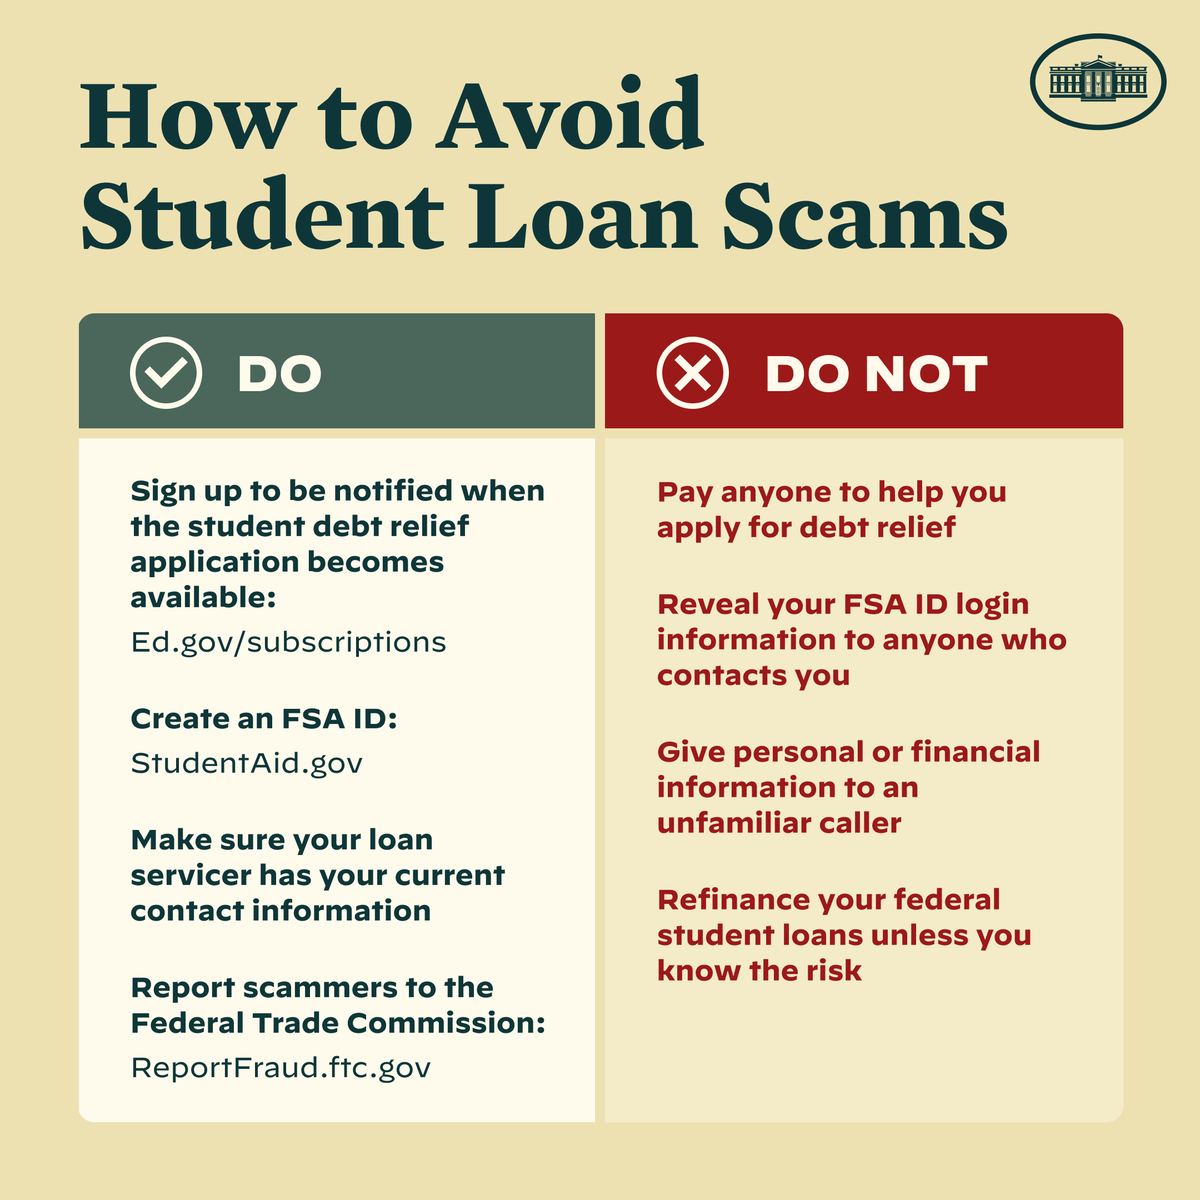 White House Avoid Student Loan Scams